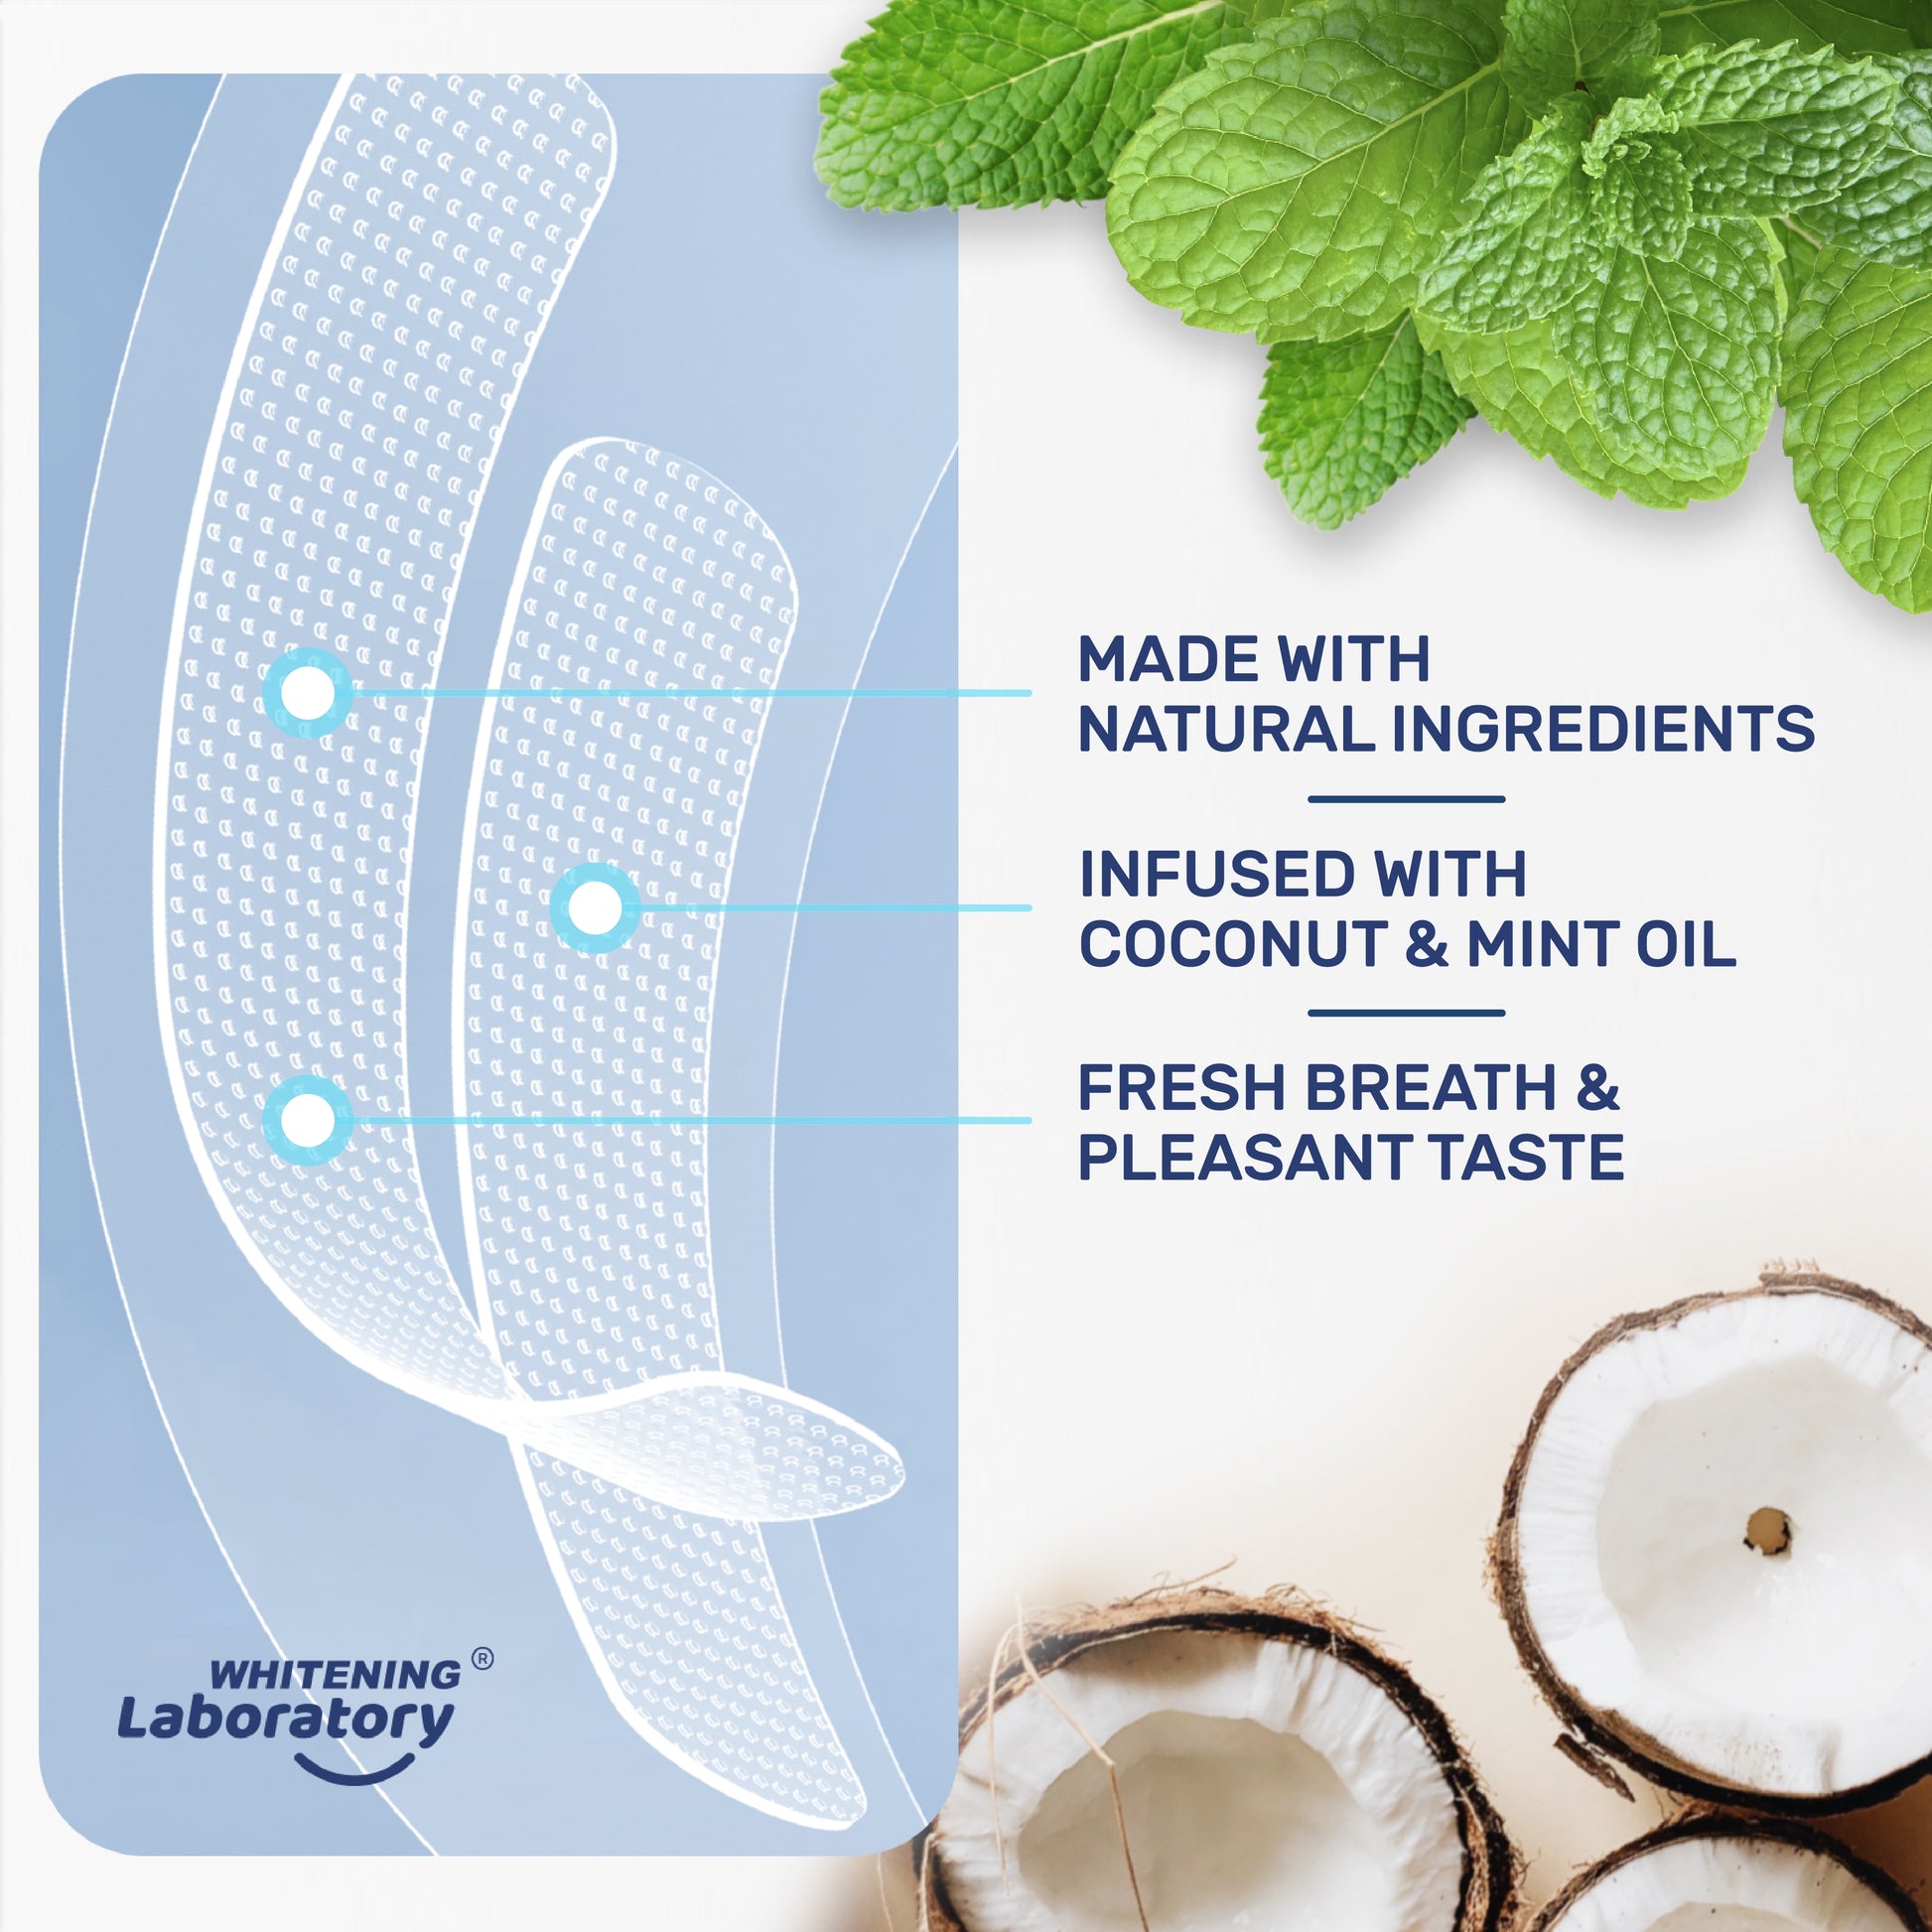 Infographic highlighting natural ingredients in Whitening Laboratory's strips, including coconut and mint oil for fresh breath and pleasant taste.